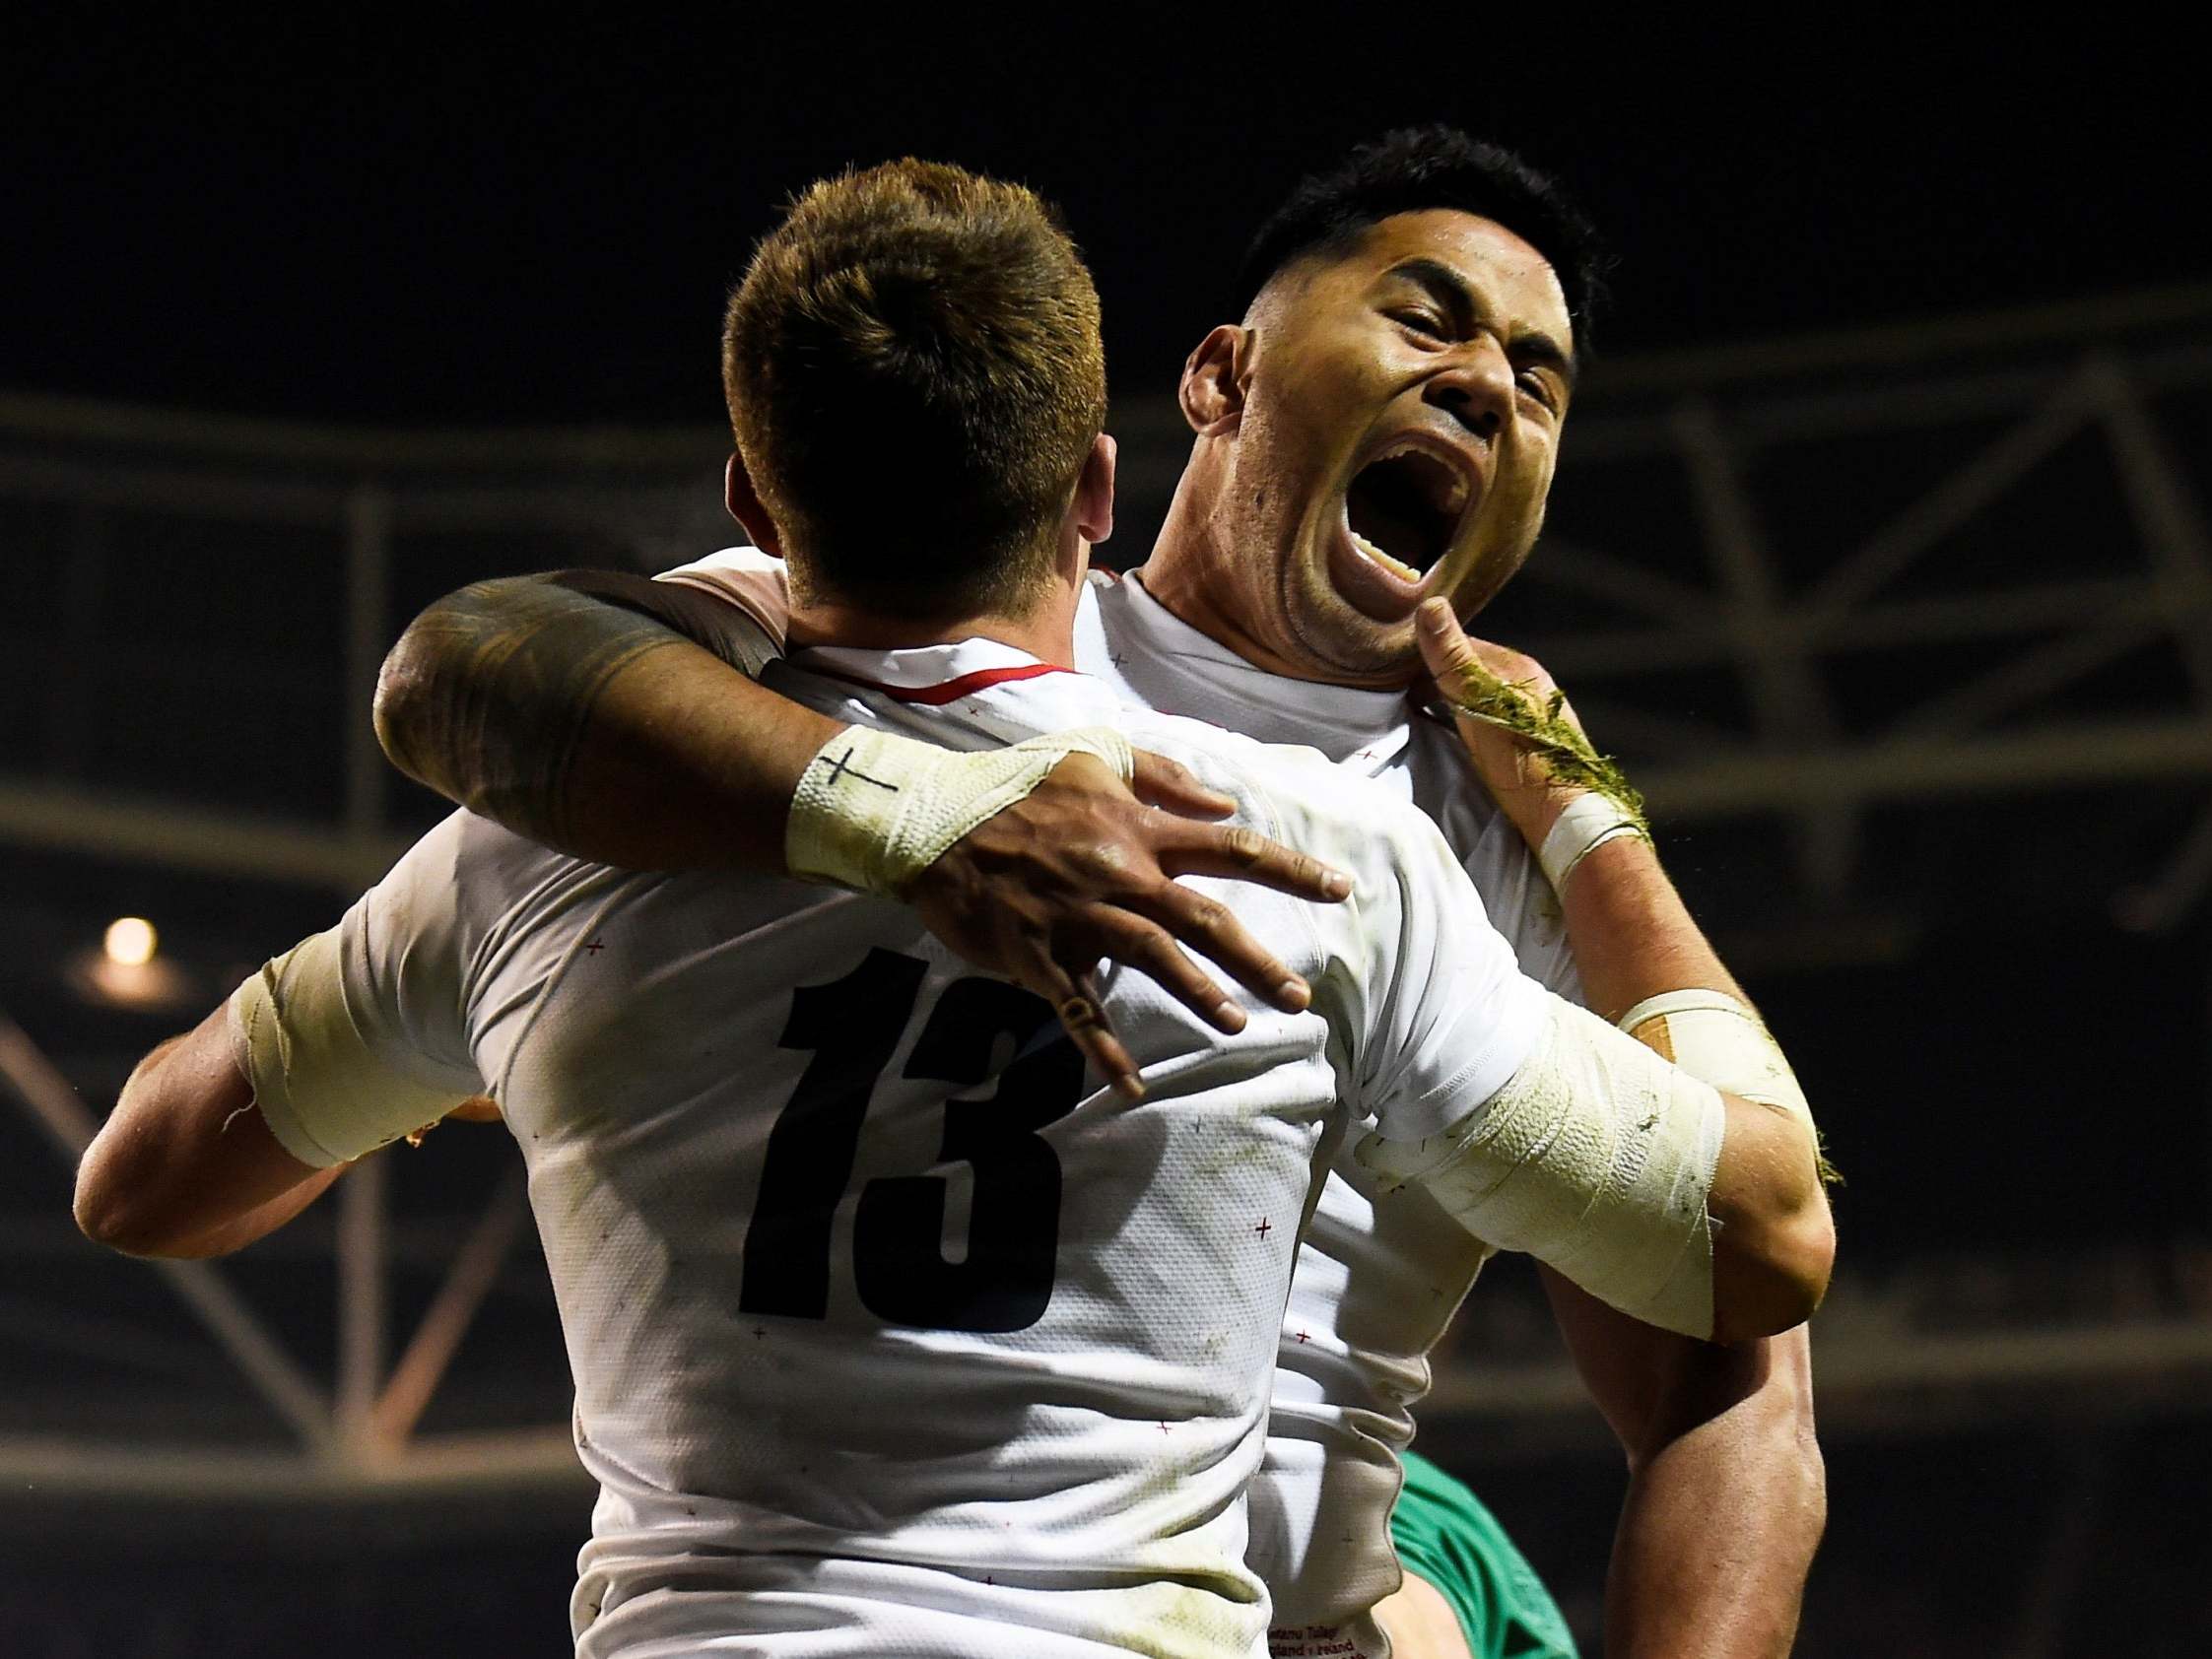 Manu Tuilagi will remain eligible for England after agreeing to join Sale Sharks